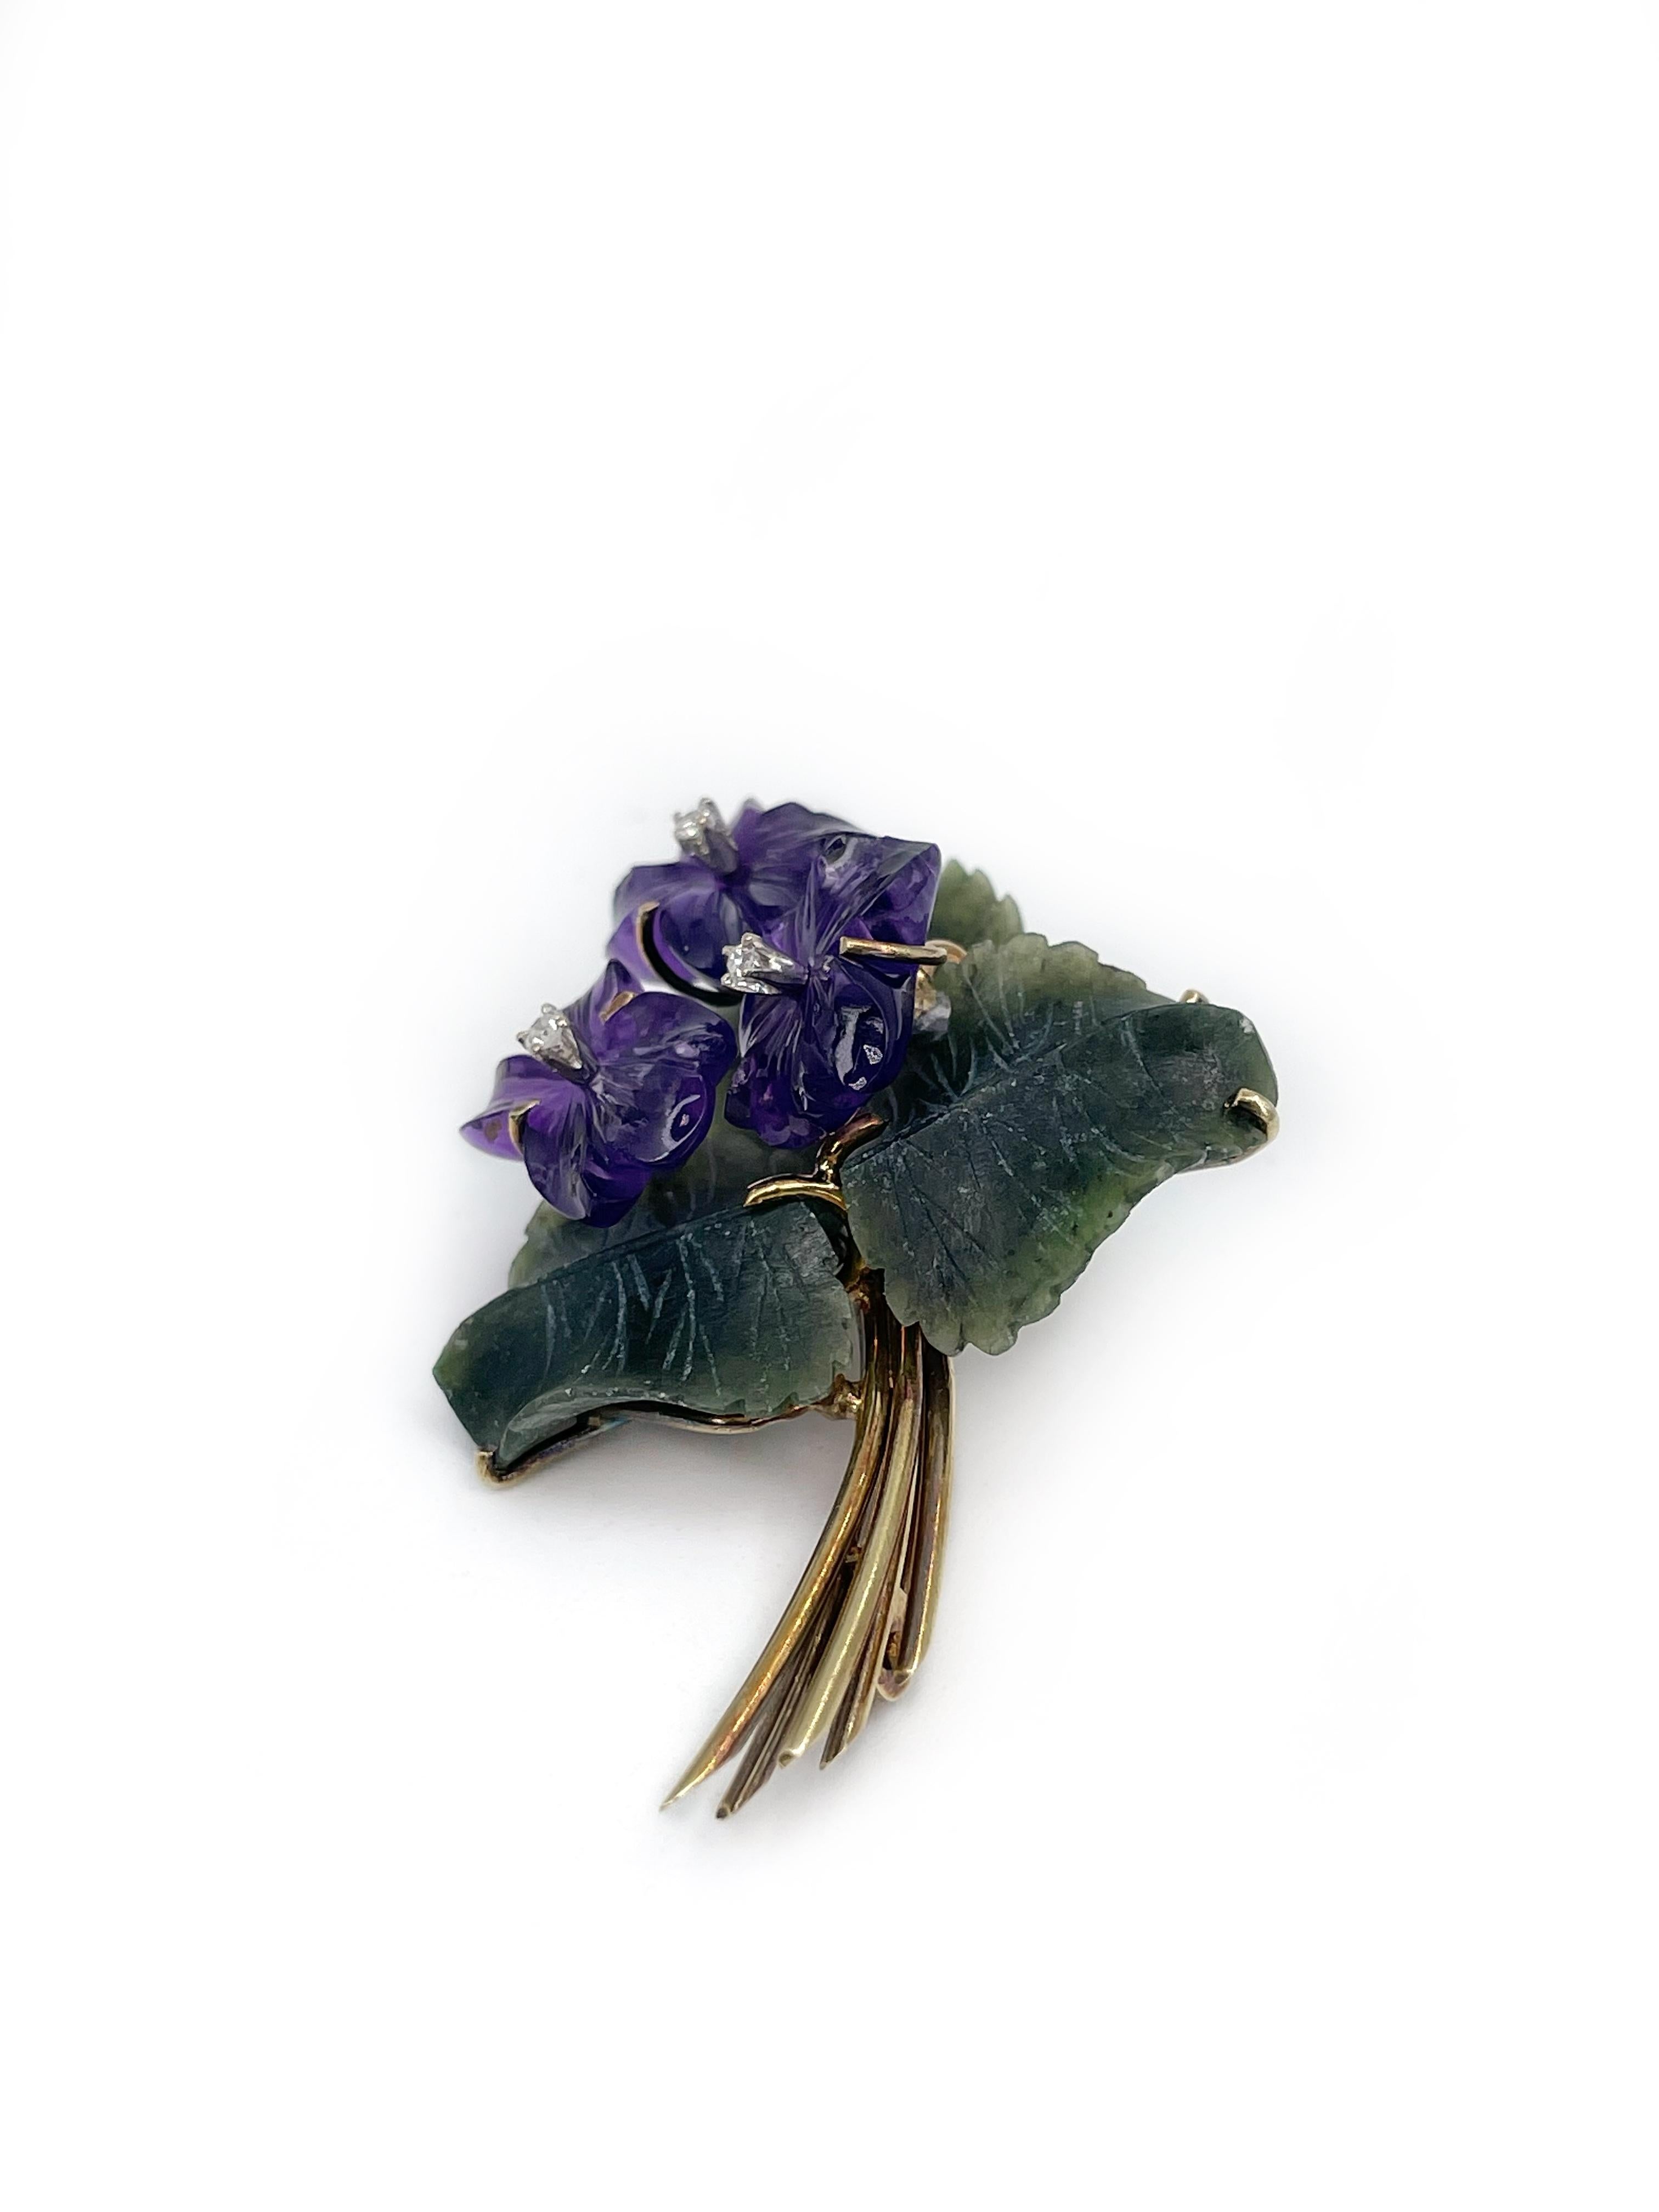 violet quartz used as decoration in brooches